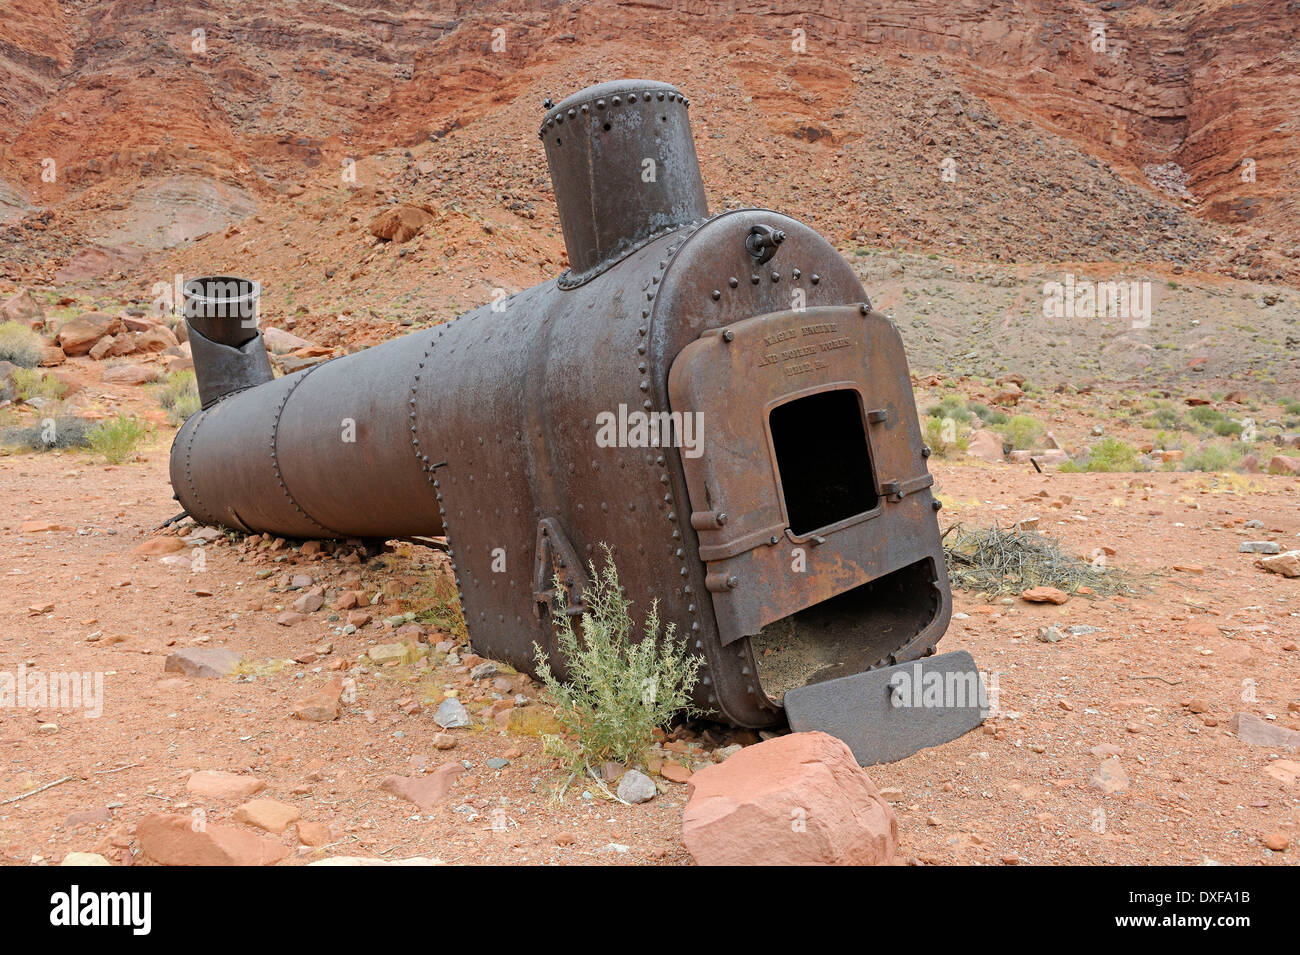 Old boiler for steamships, from 1940, Lee's Ferry, Arizona, USA Stock Photo